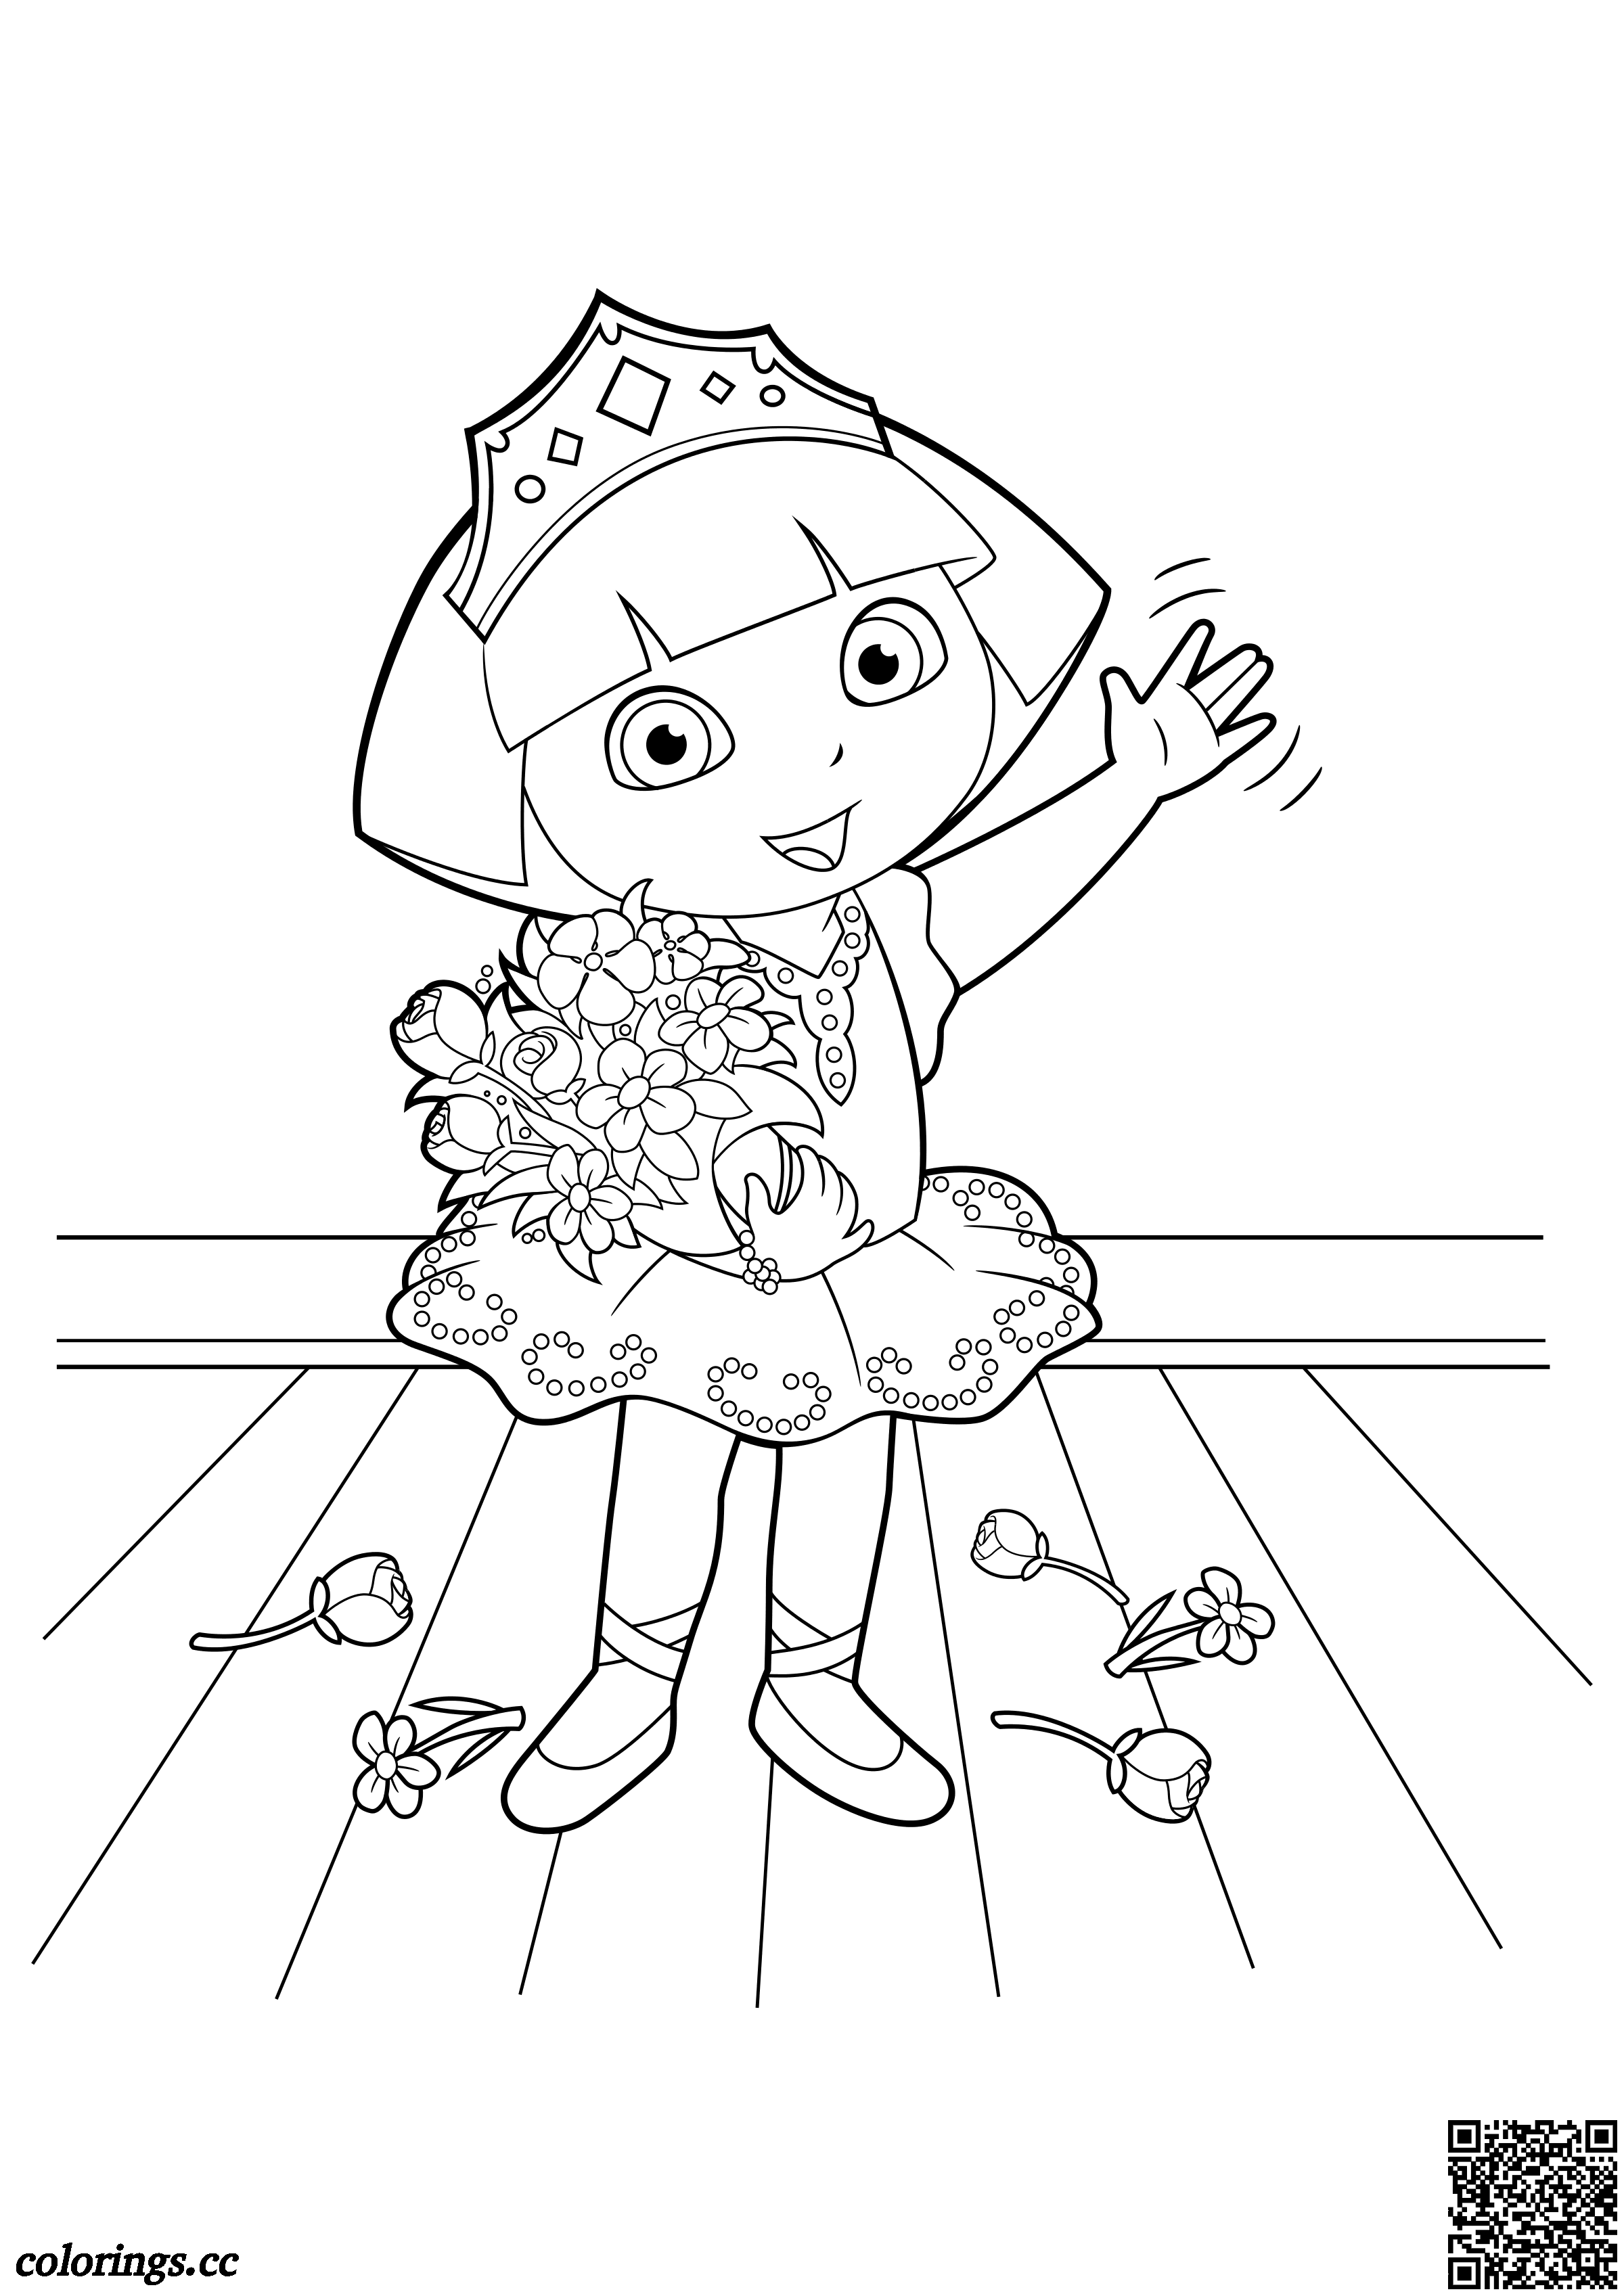 Dasha as a princess on stage coloring pages, Dora the explorer coloring  pages - Colorings.cc